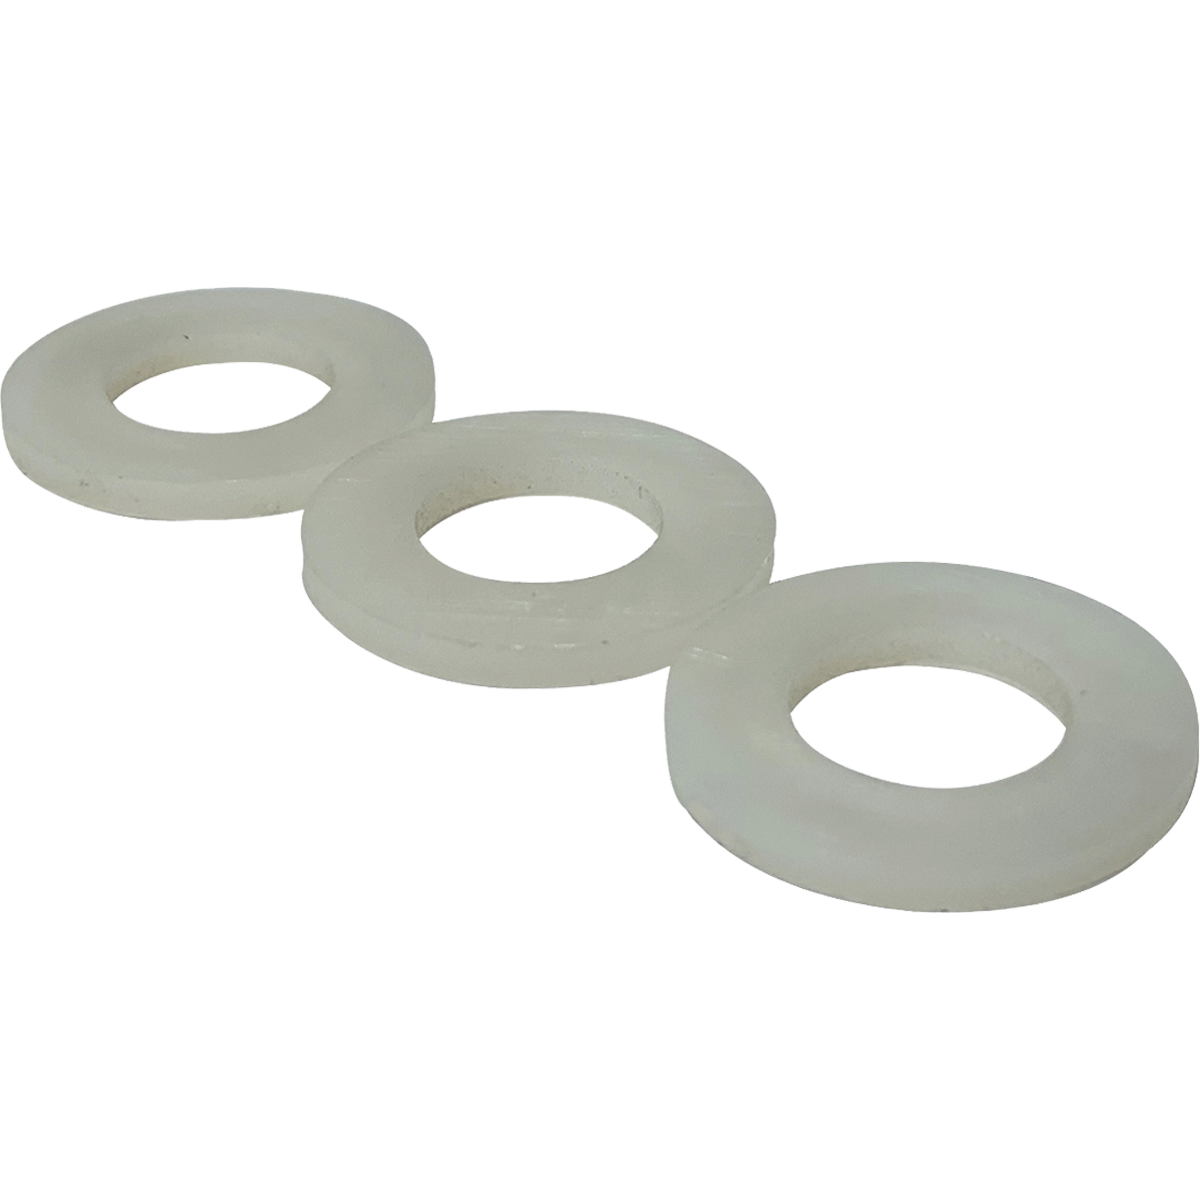 Metric, nylon, ‘Form A’ flat washers are highly resistant to most environmental conditions